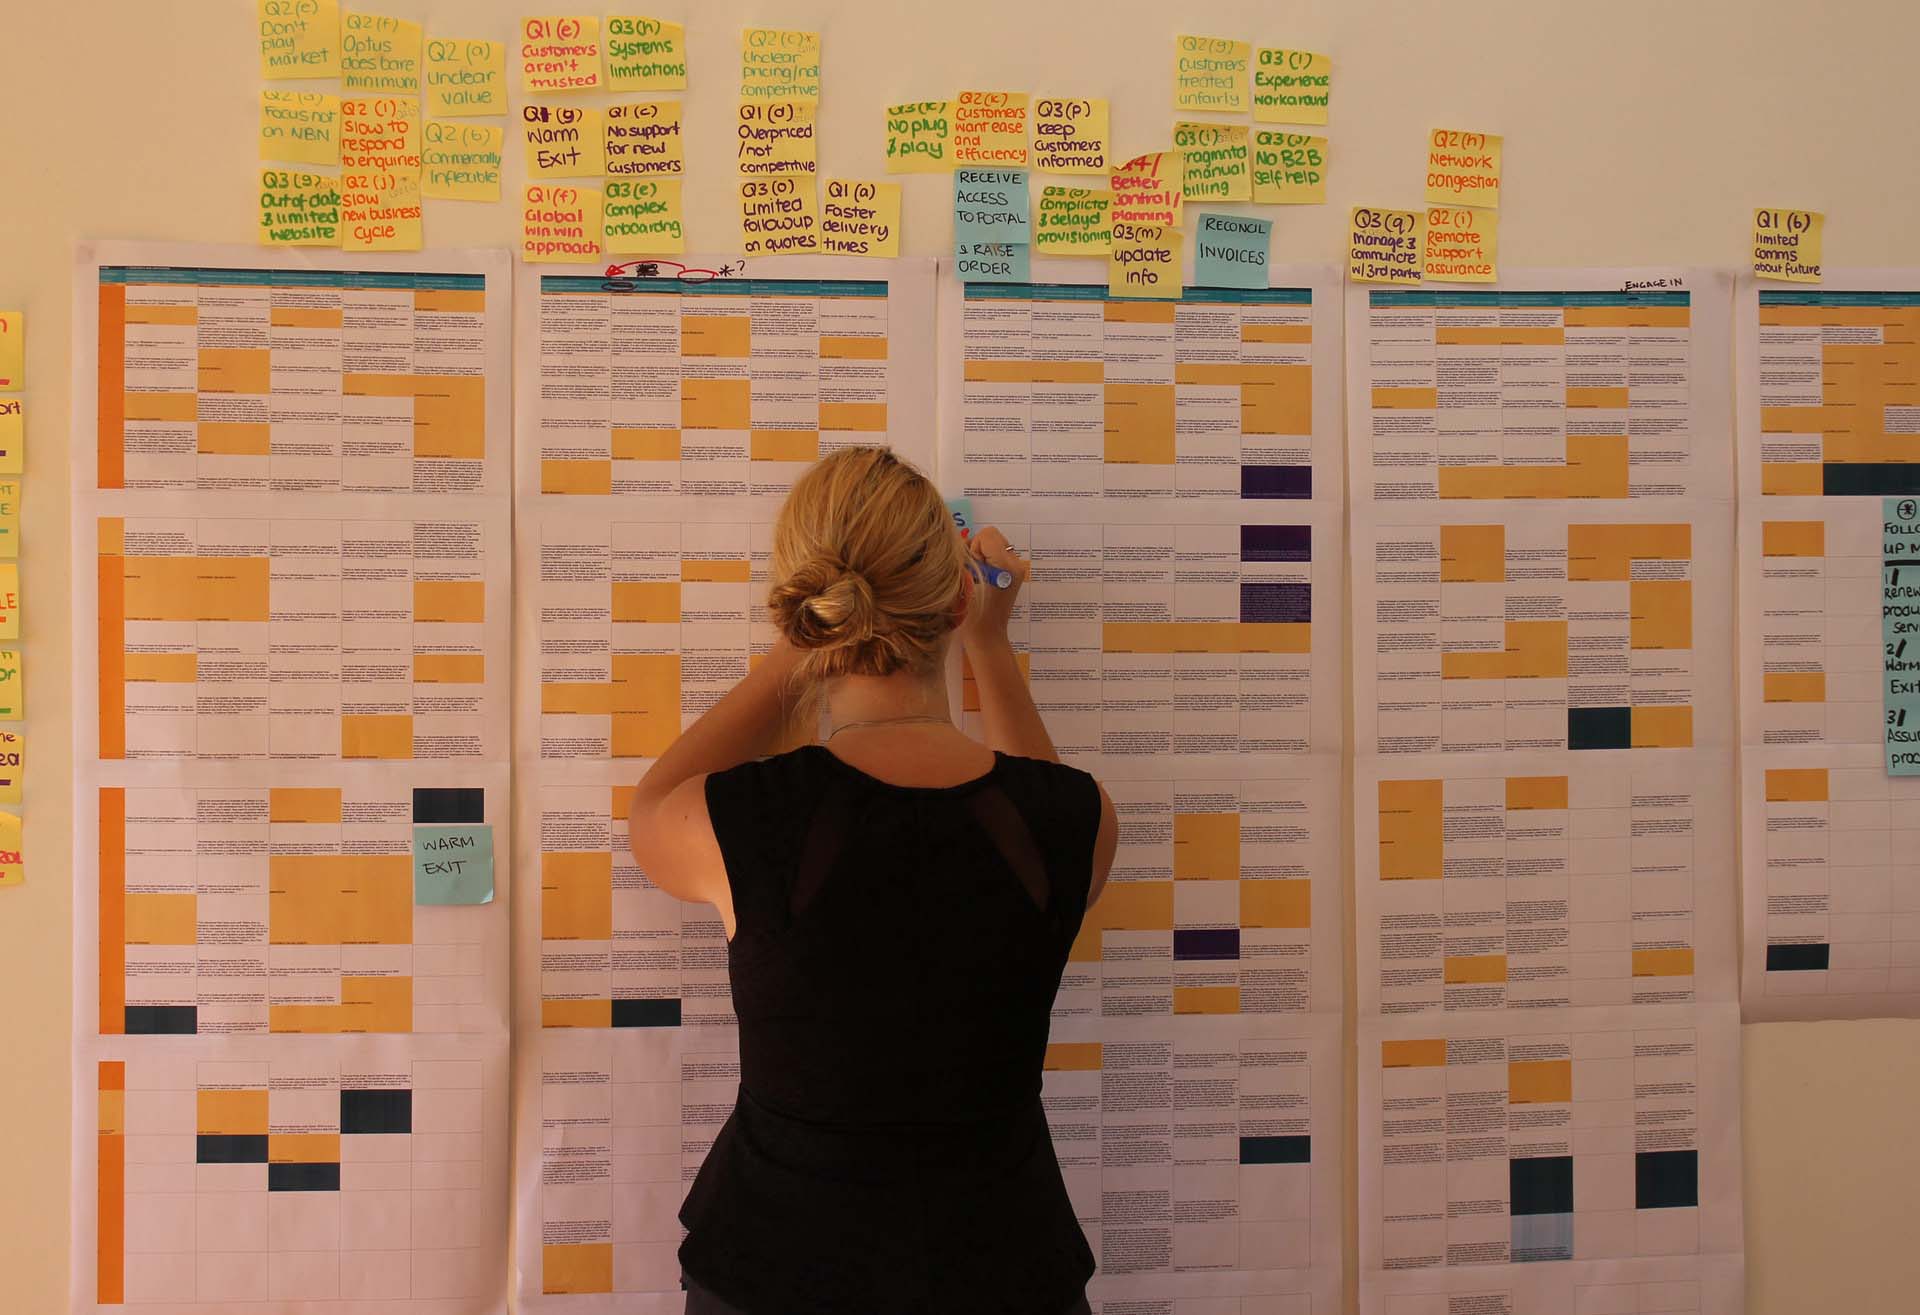 Proto experience designer working on a large wall of customer data